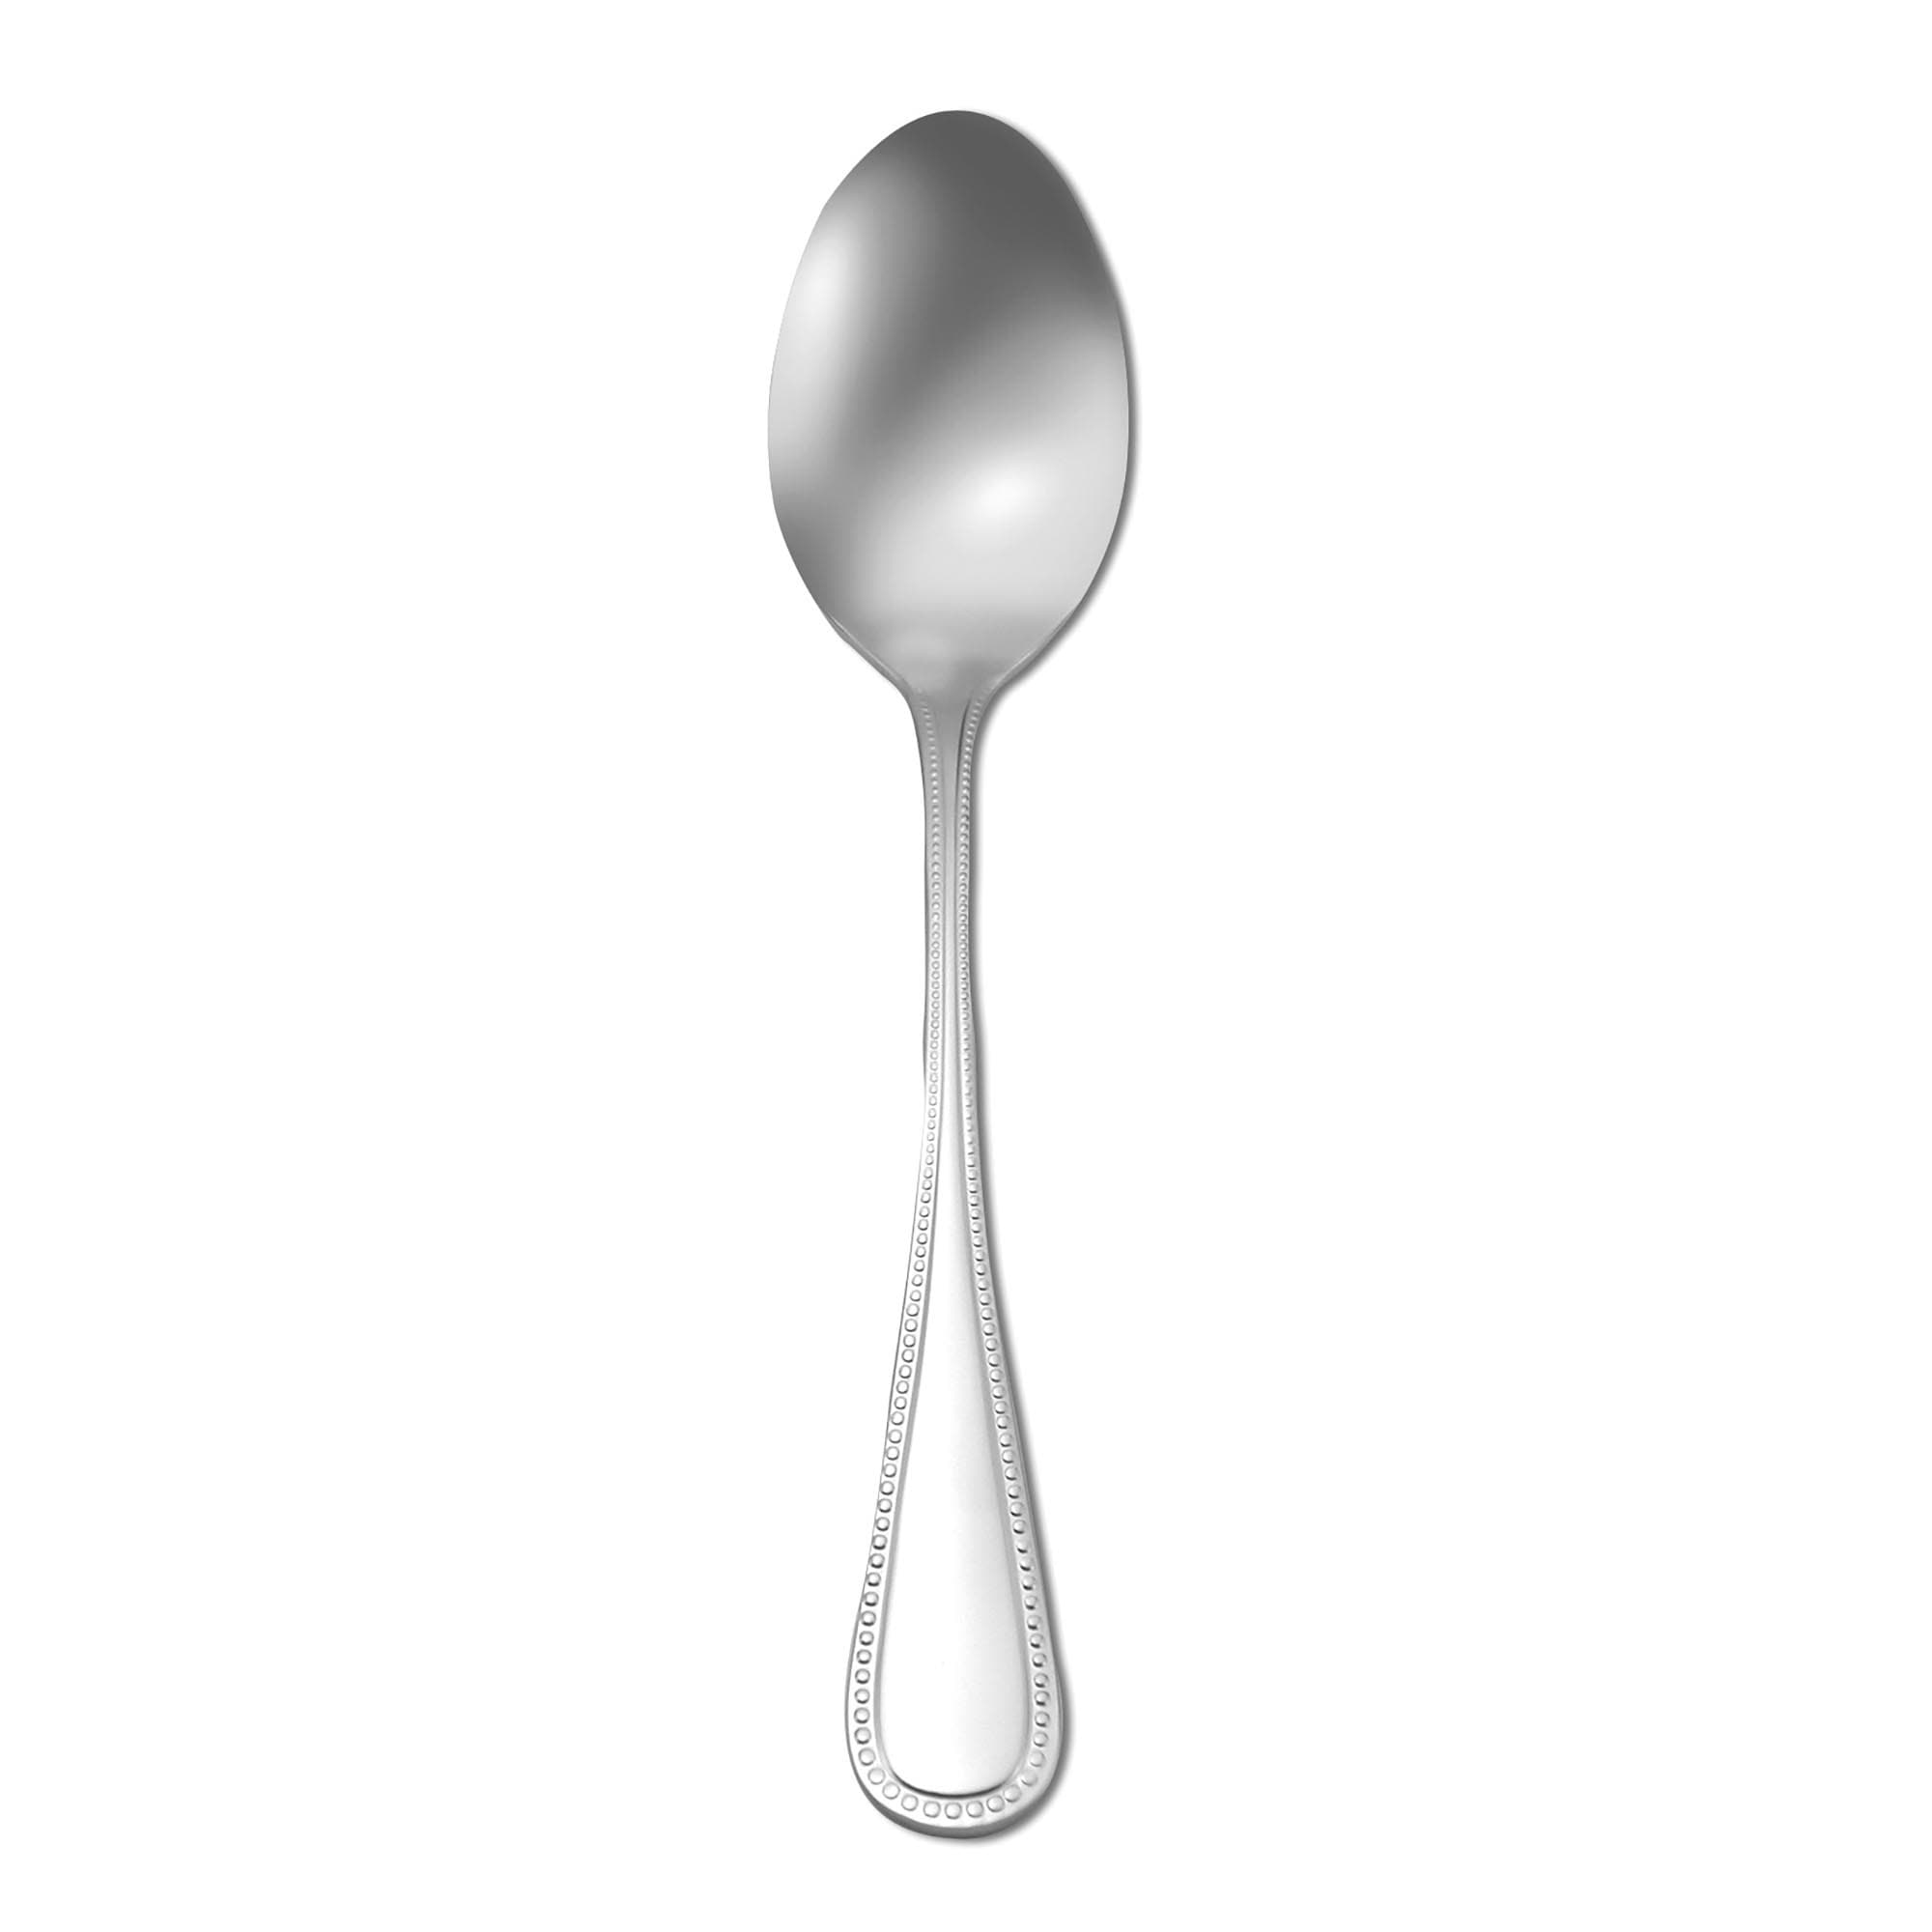 https://ak1.ostkcdn.com/images/products/is/images/direct/3bf44c21a76cd2ec6d8562ece27bc35b90f1c831/Oneida-18-10-Stainless-Steel-Pearl-Tablespoon-Serving-Spoons-%28Set-of-12%29.jpg